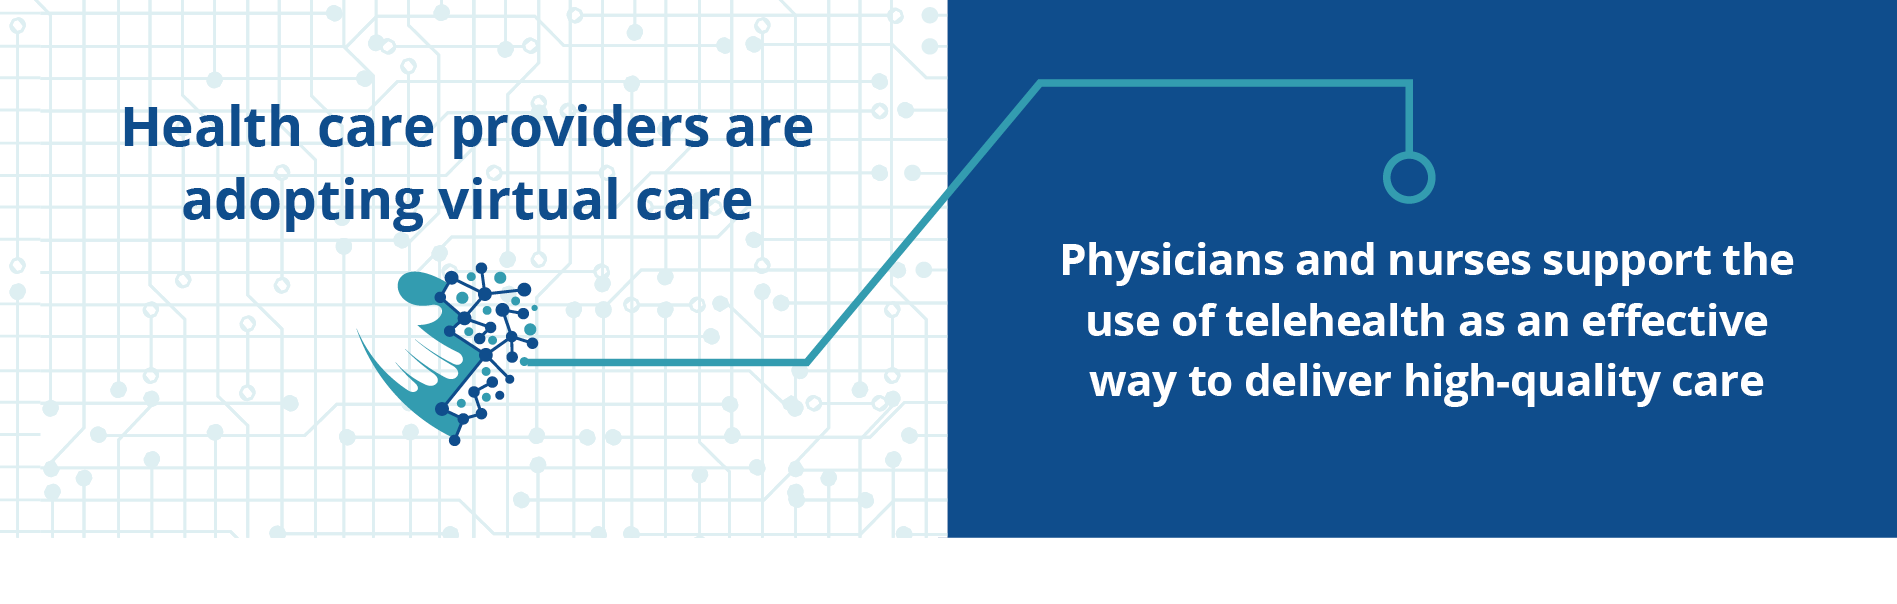 Physicians and nurses support the use of telehealth as an effective way to deliver high-quality care